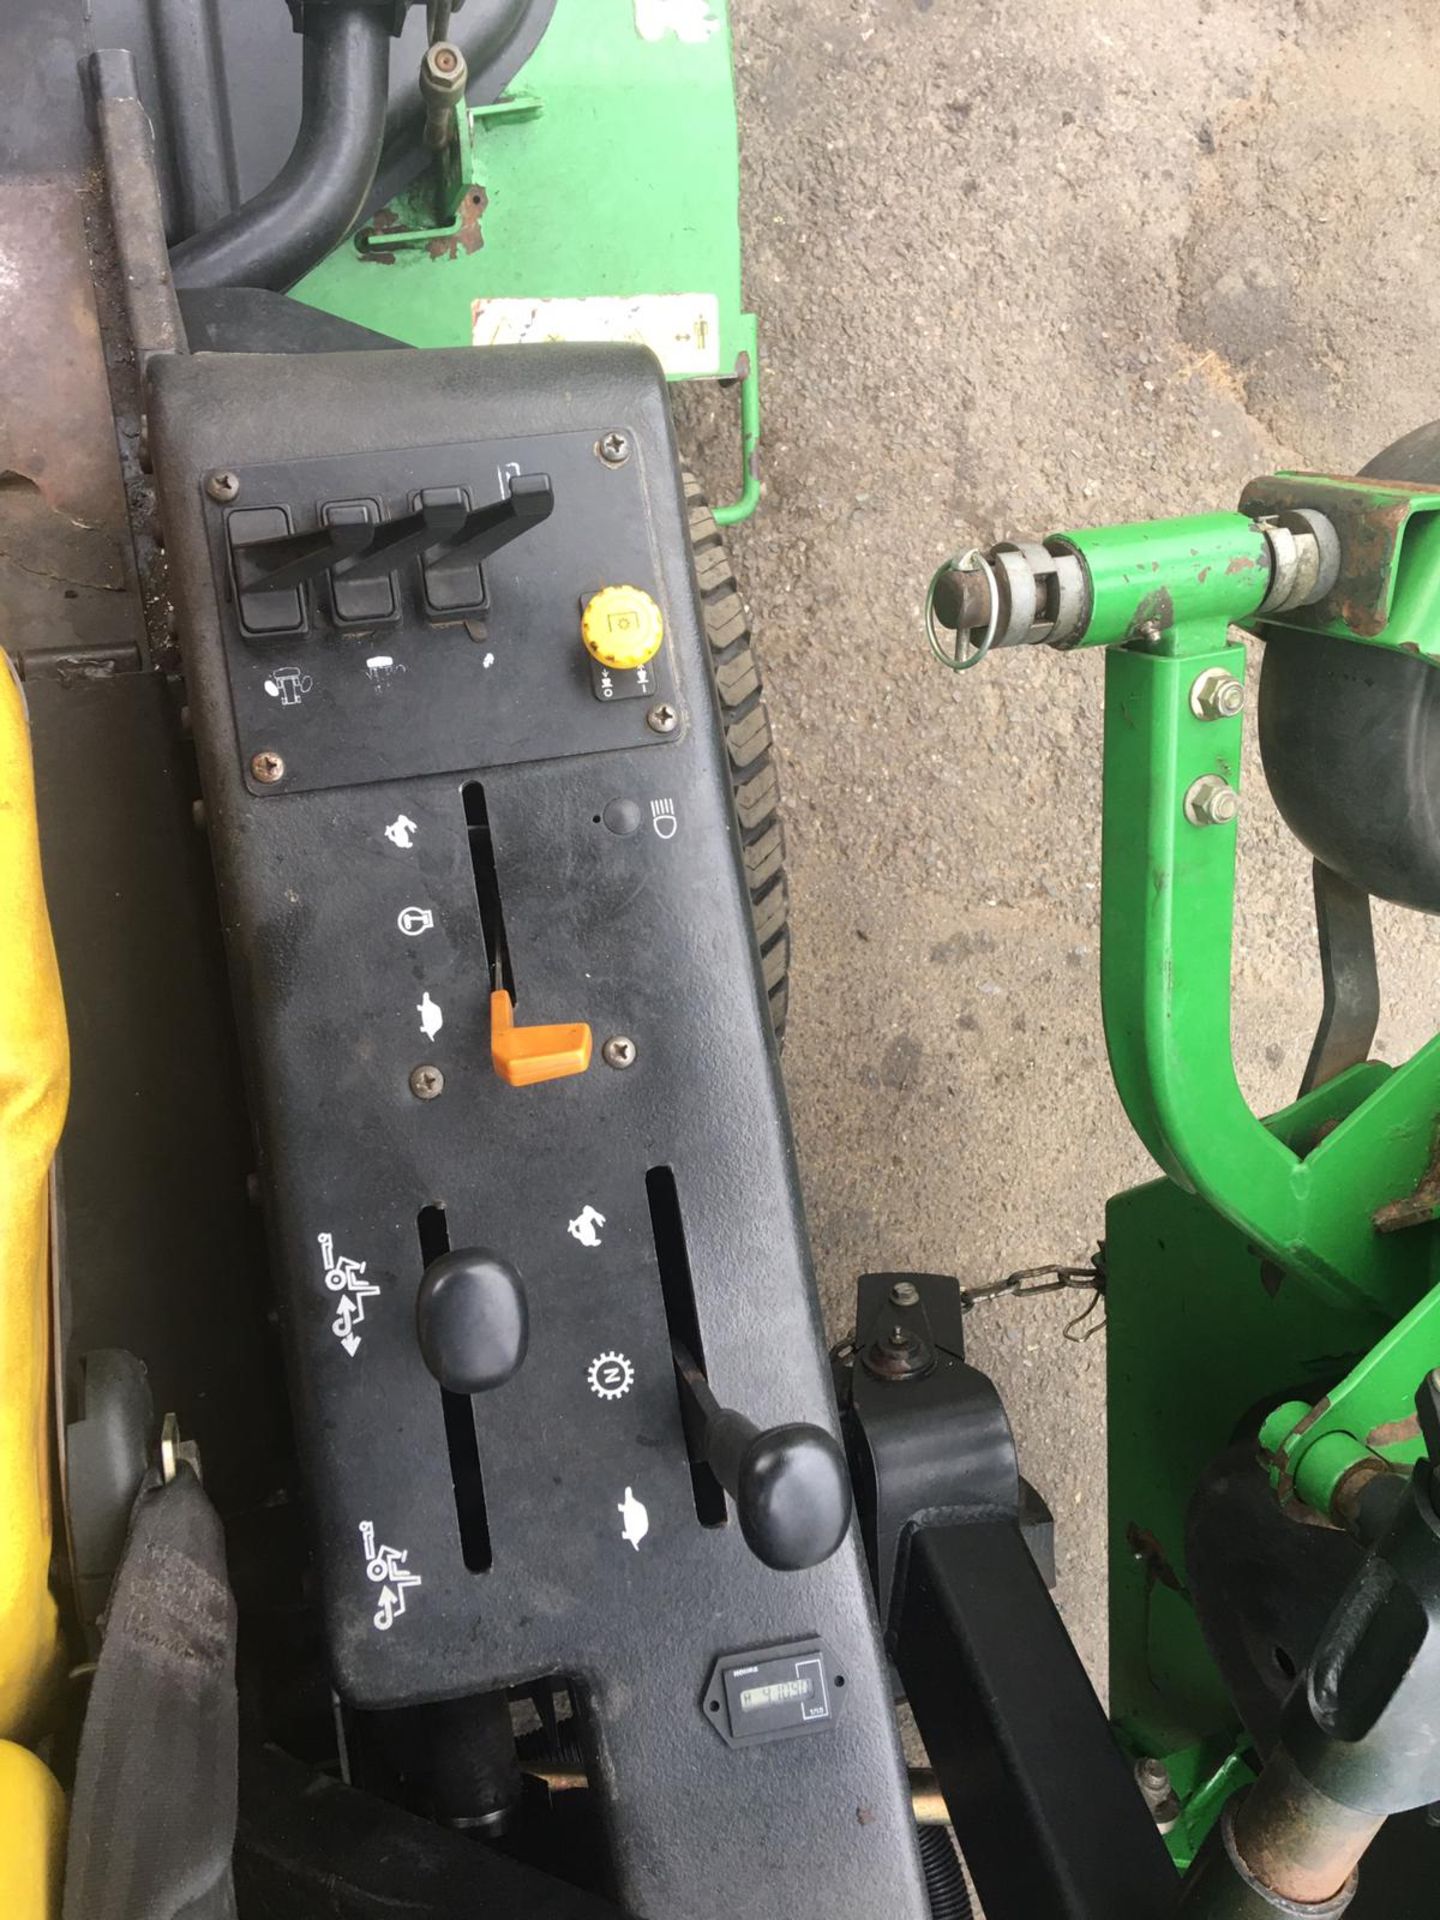 JOHN DEERE 1600 WIDE AREA TURBO BATWING RIDE ON LAWN MOWER, CRUISE CONTROL, RUNS & WORKS *NO VAT* - Image 16 of 24